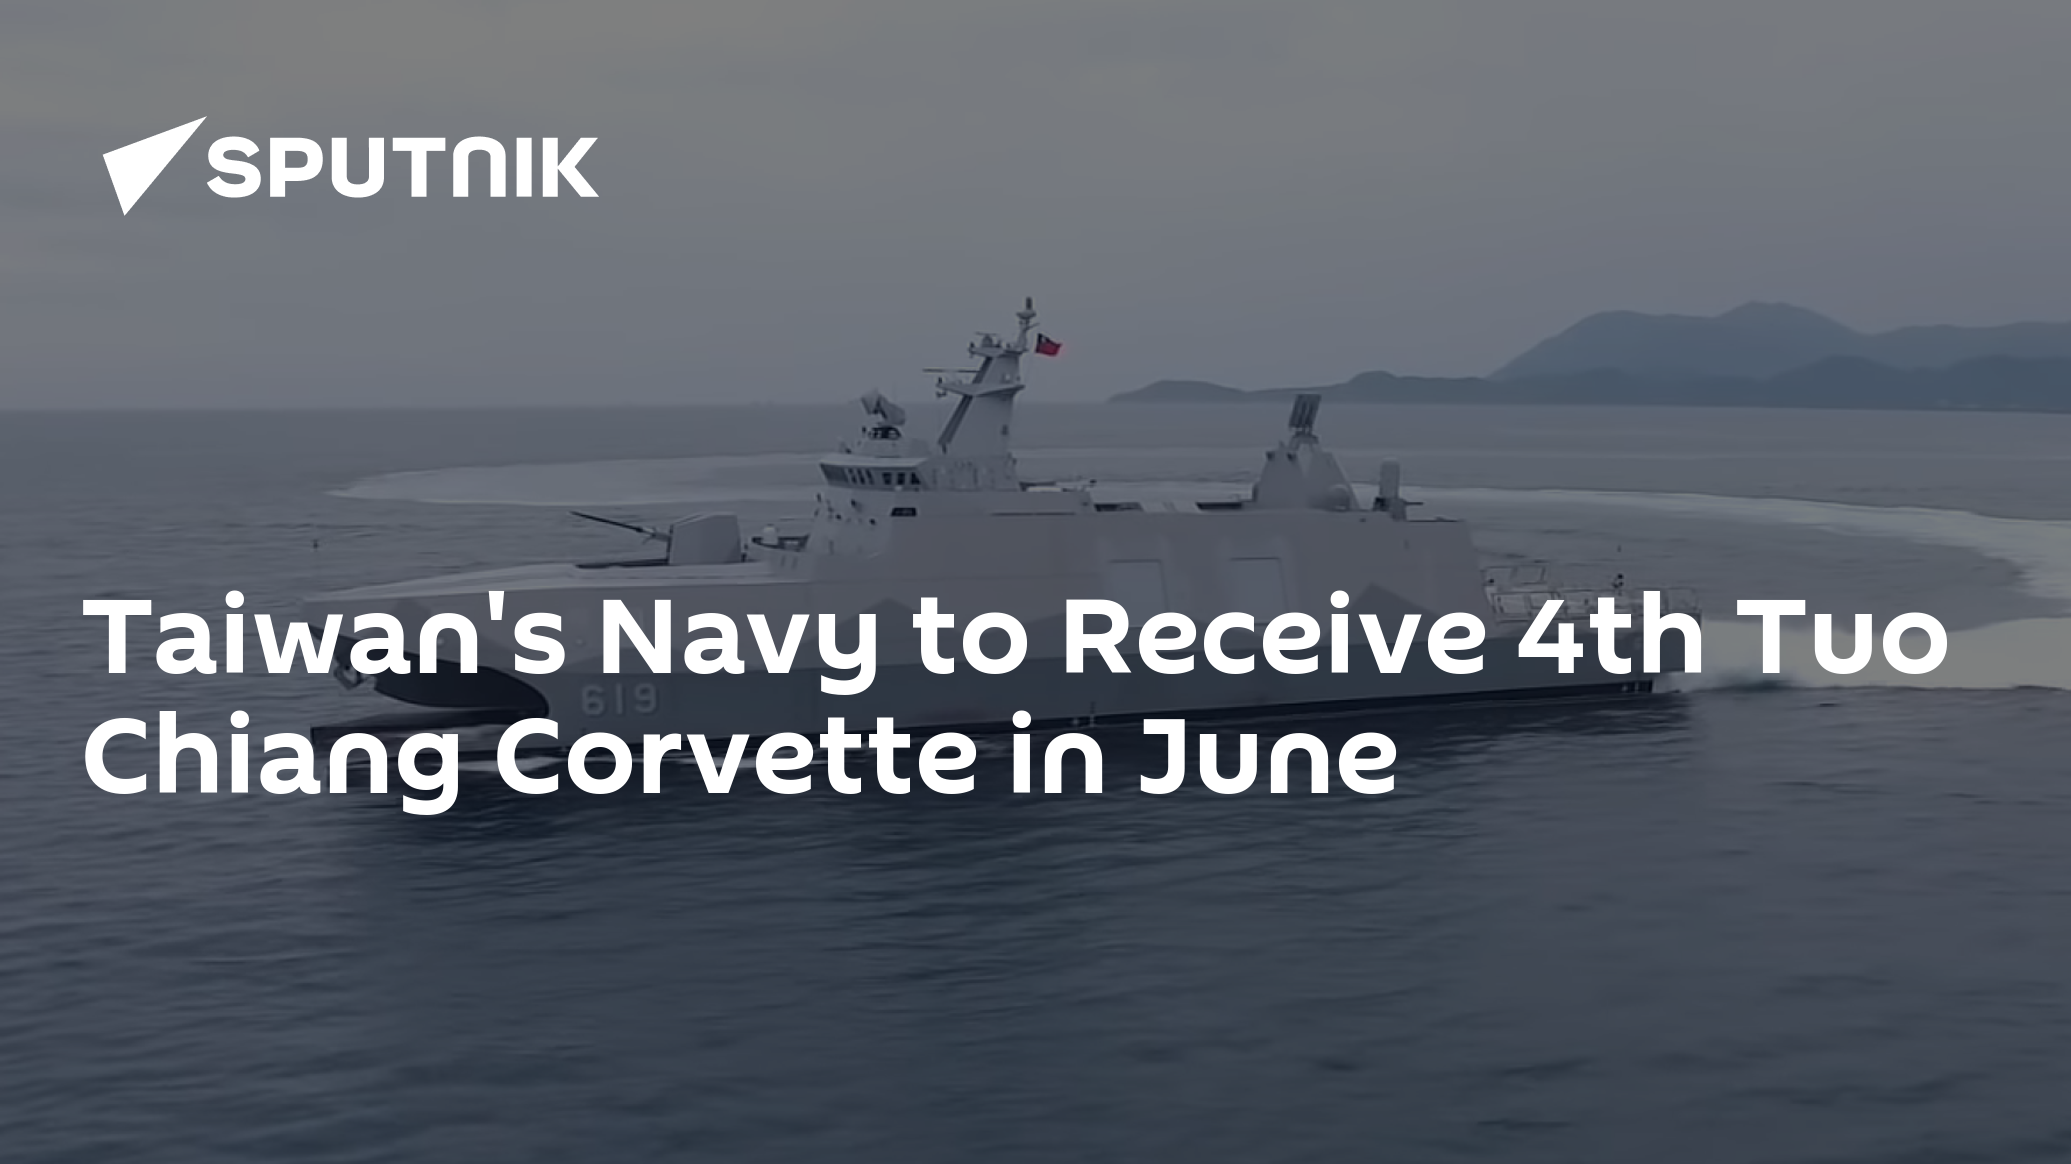 Taiwan's Navy to Receive 4th Tuo Chiang Corvette in June